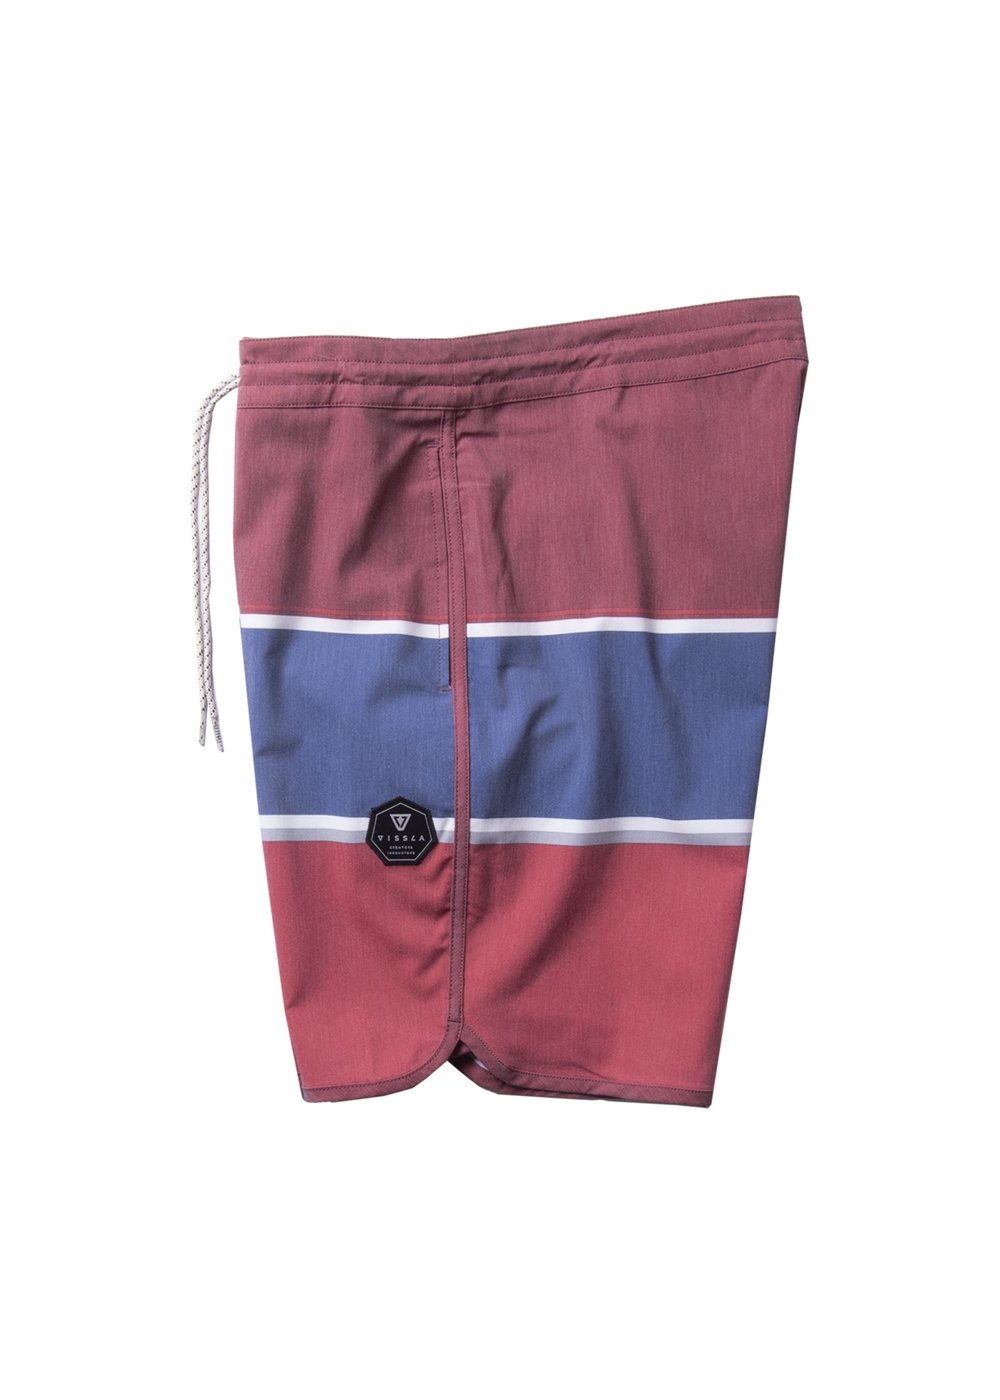 Vissla Blood 17" The Point Boys Boardshort Side View. Multi Color with Patch.